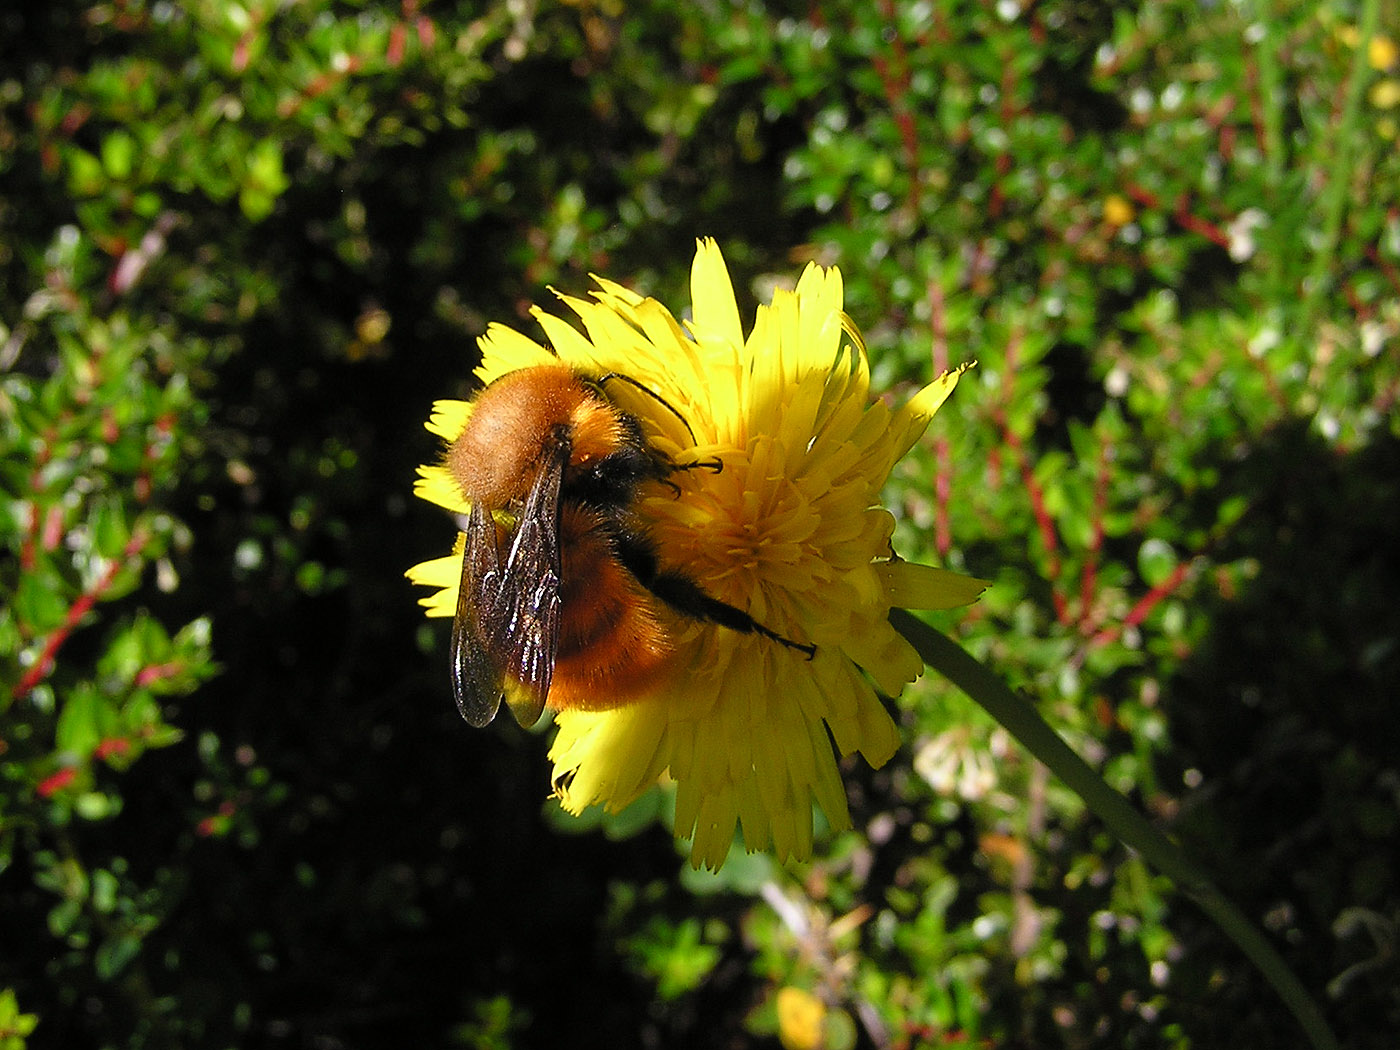 Bee on flower, Torres del Paine National Park, Chile